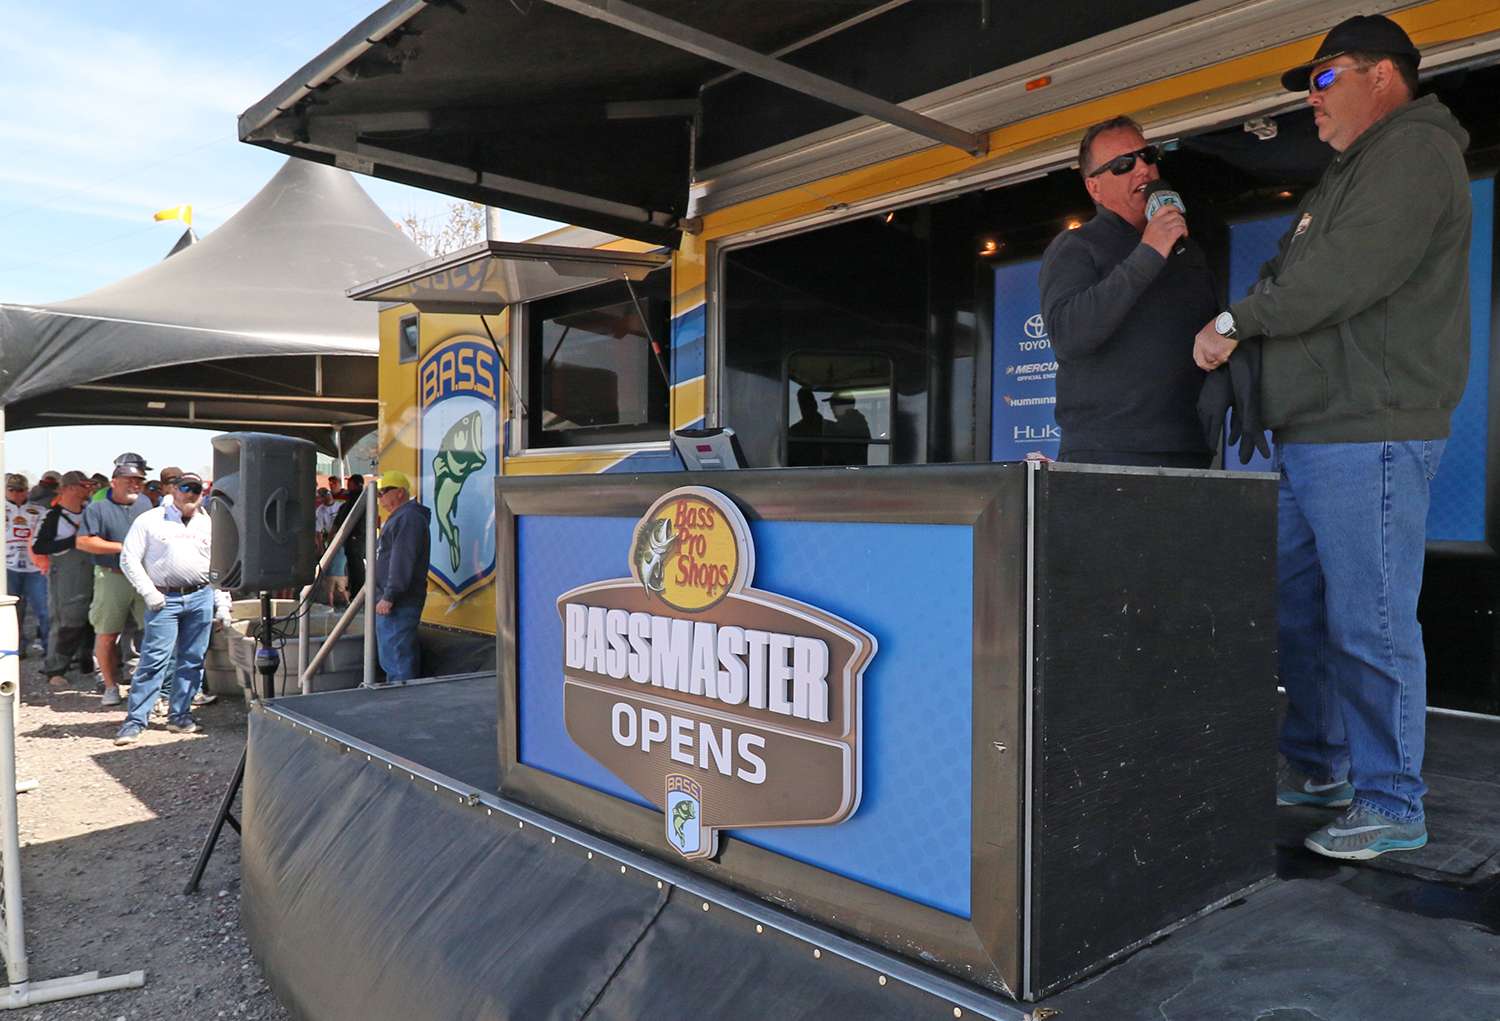 Day 2 weigh-in at the 2018 Bass Pro Shops Central Open #2 at Arkansas River indicated tough fishing for the bulk of the field.